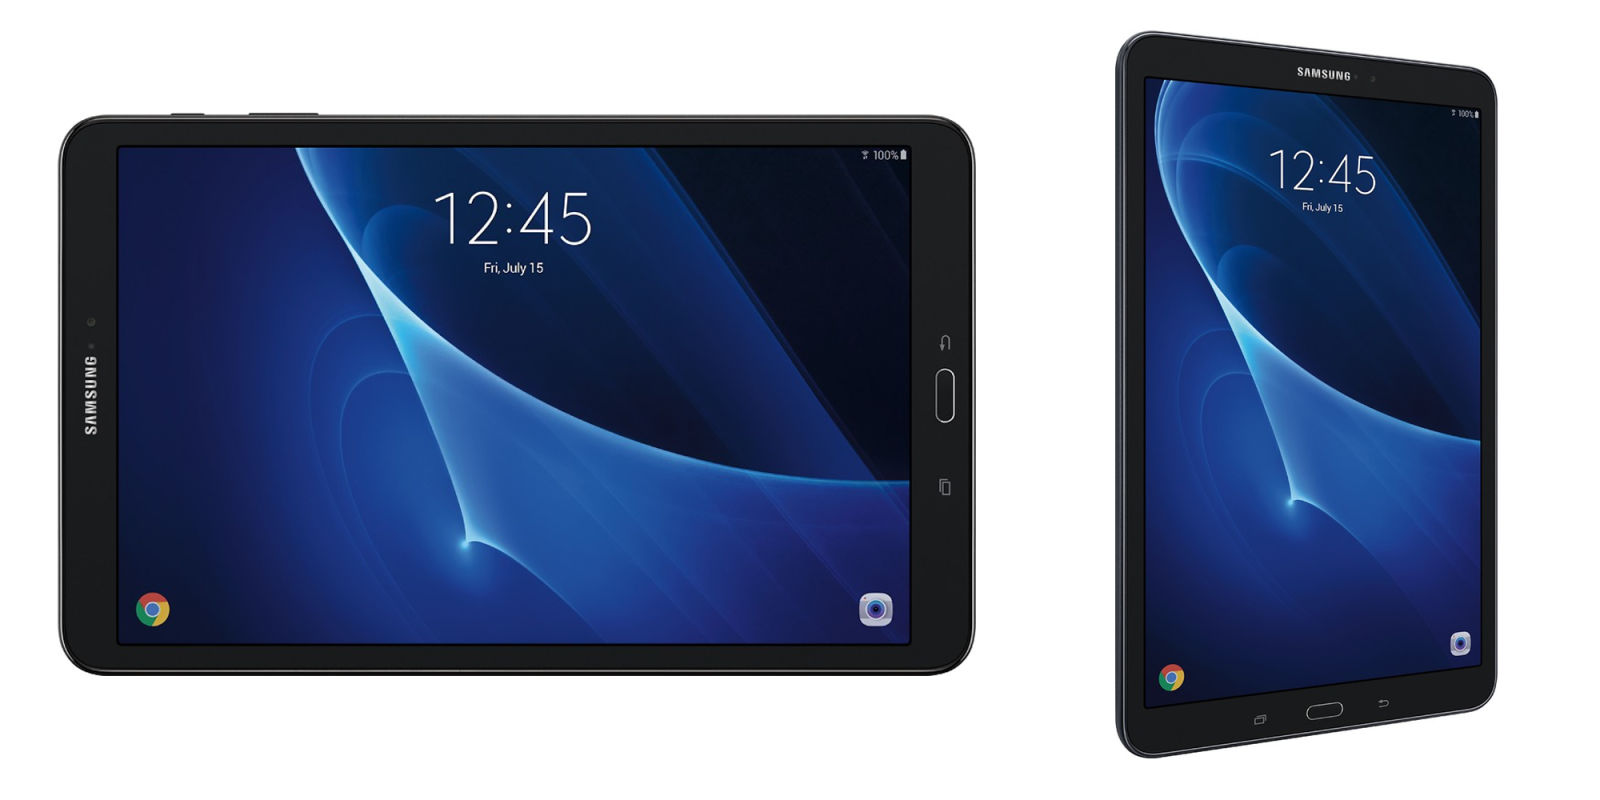 Samsung's Android-powered 8-inch Galaxy Tab A falls to $170 shipped (15